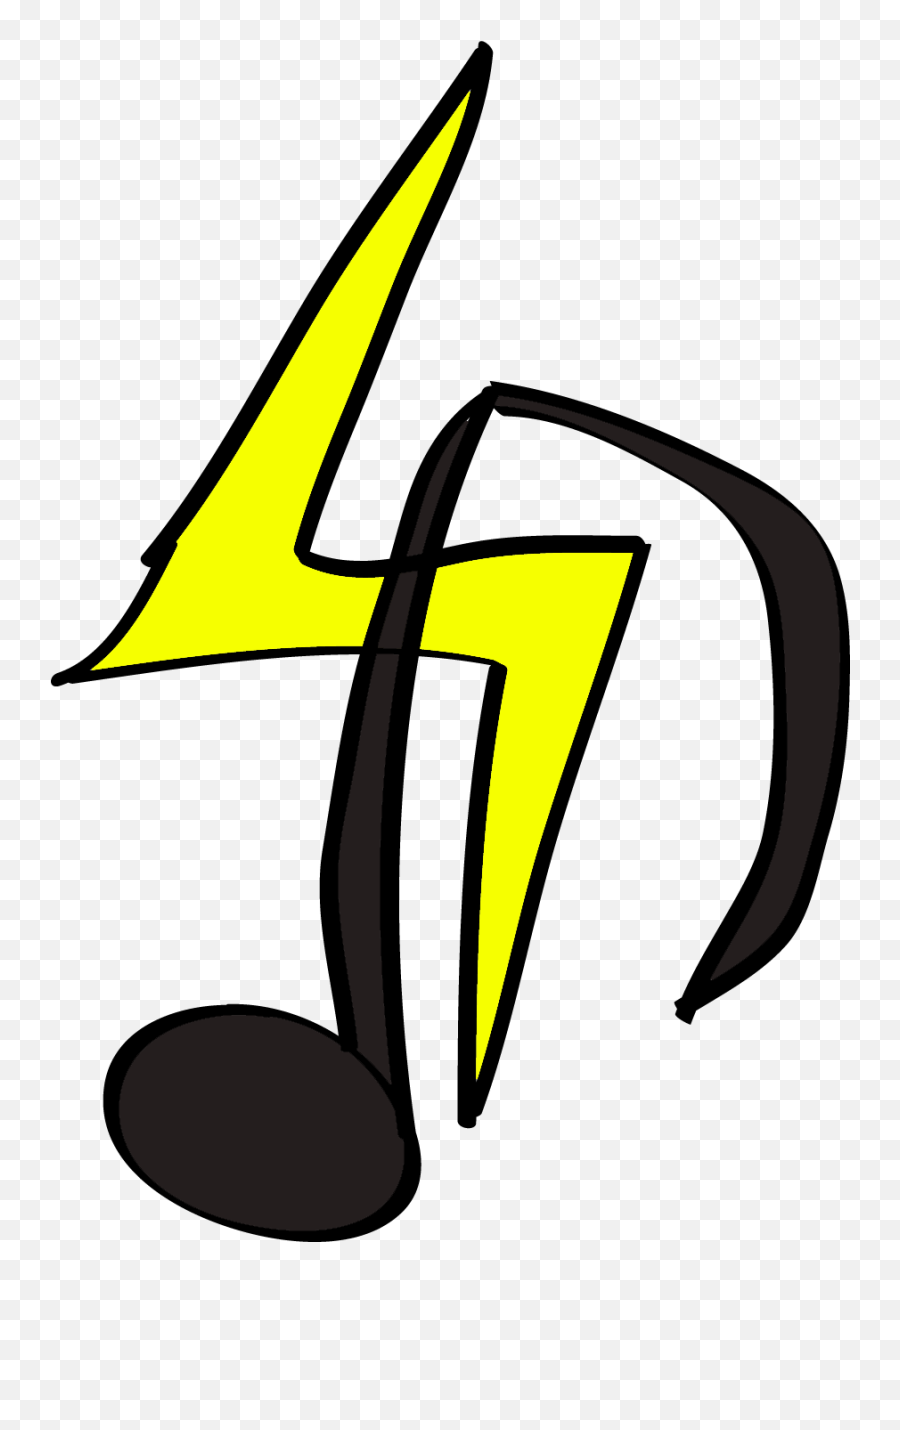 Cutie Mark For This Character - Music Note With Lightning Bolt Emoji,Lighting Bolt Emoji